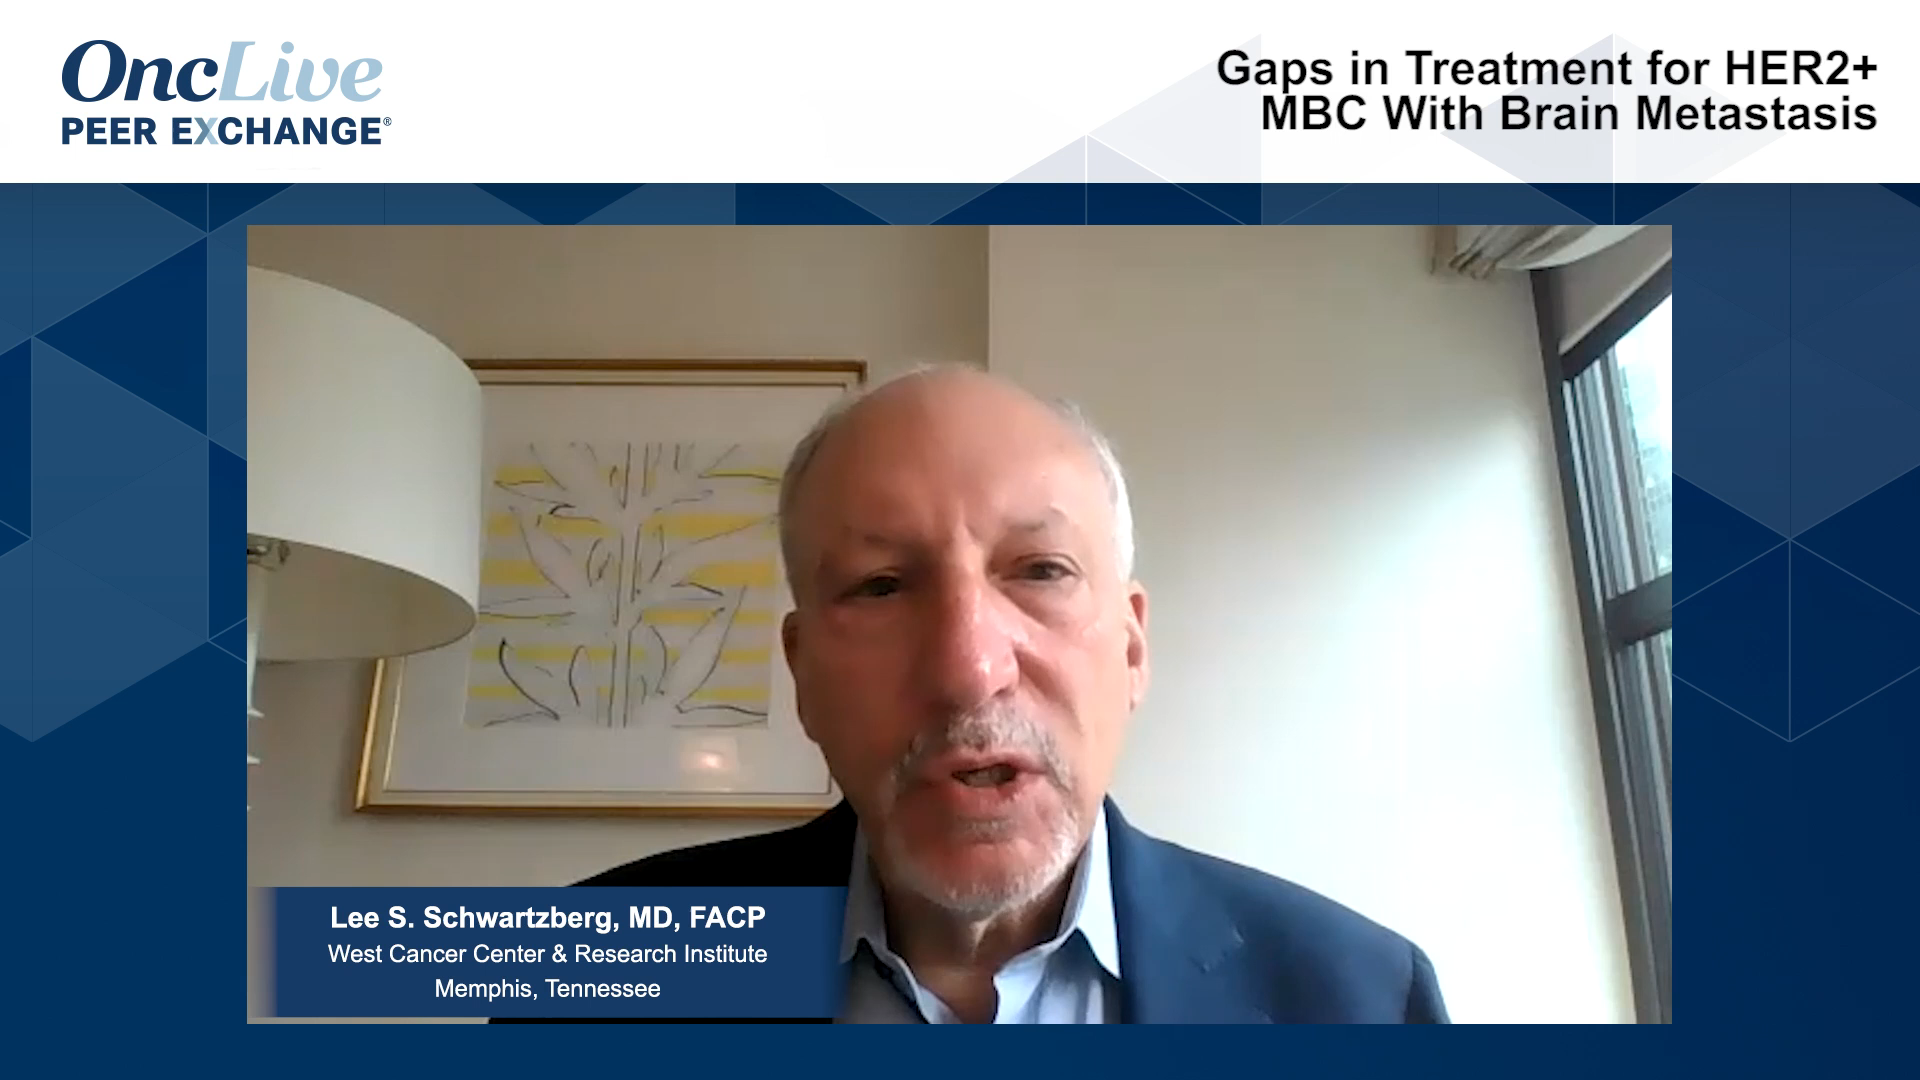 Gaps in Treatment for HER2+ MBC With Brain Metastasis